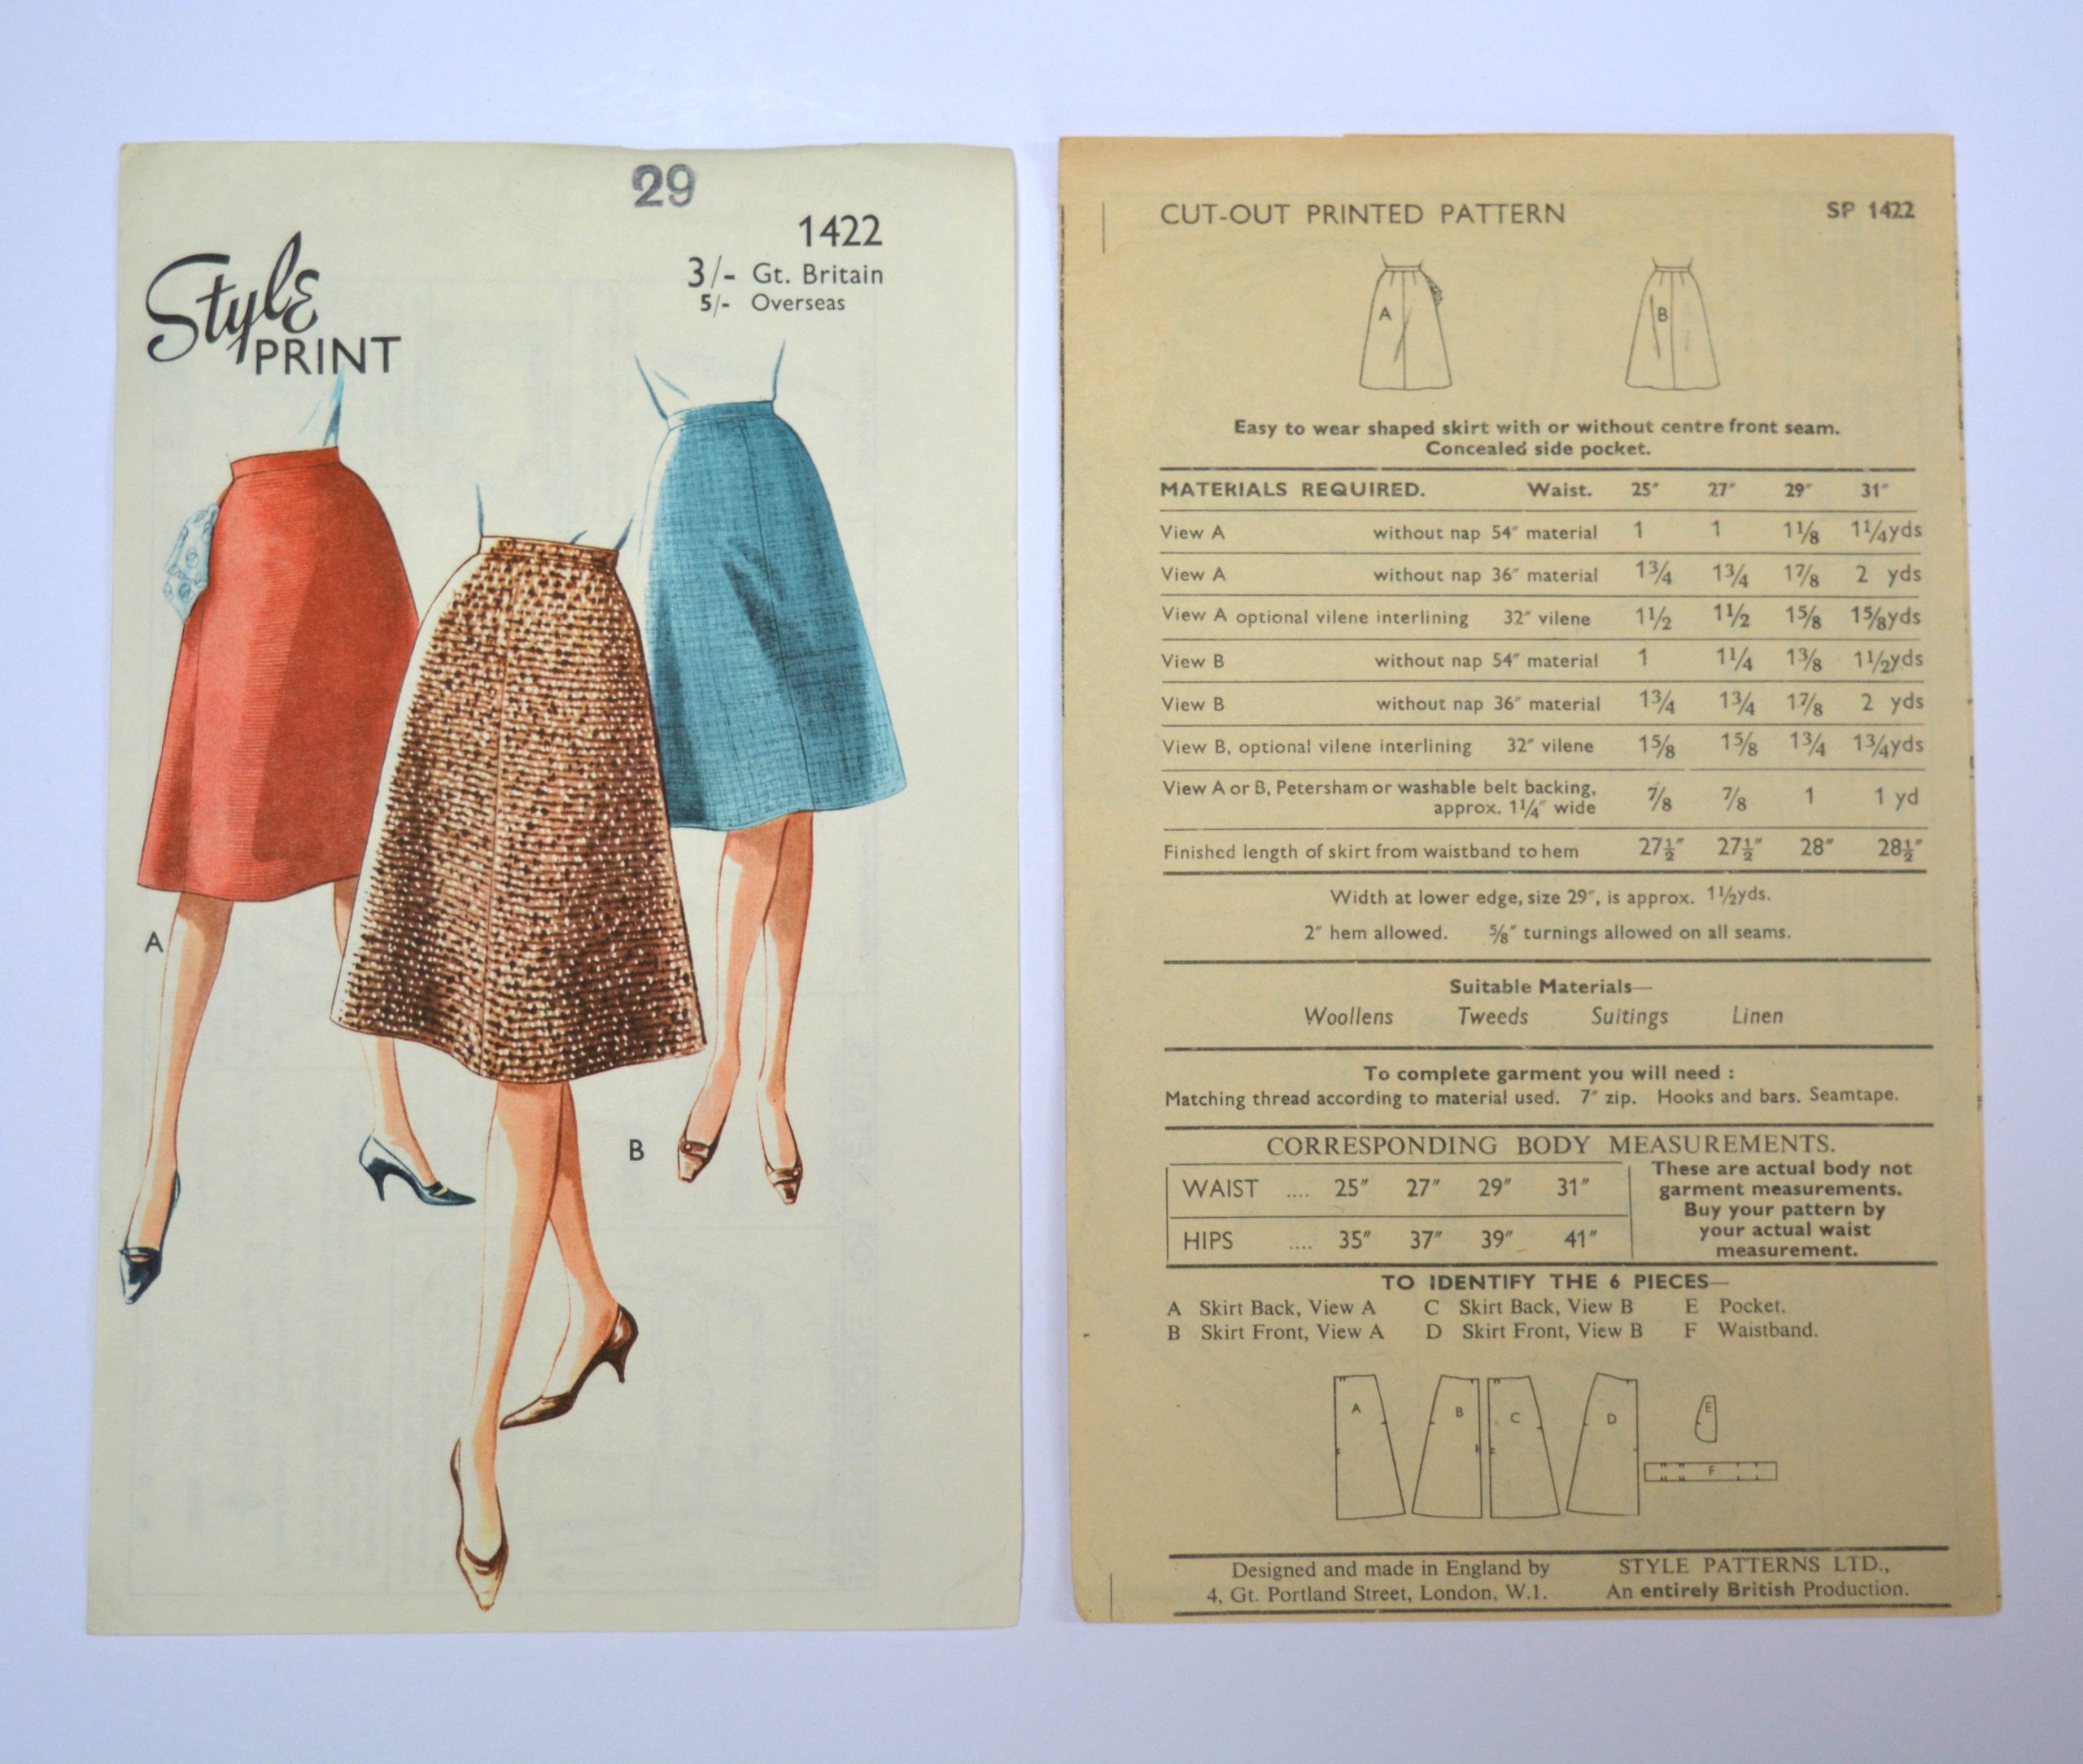 Why do so many vintage sewing patterns have a seam down the middle